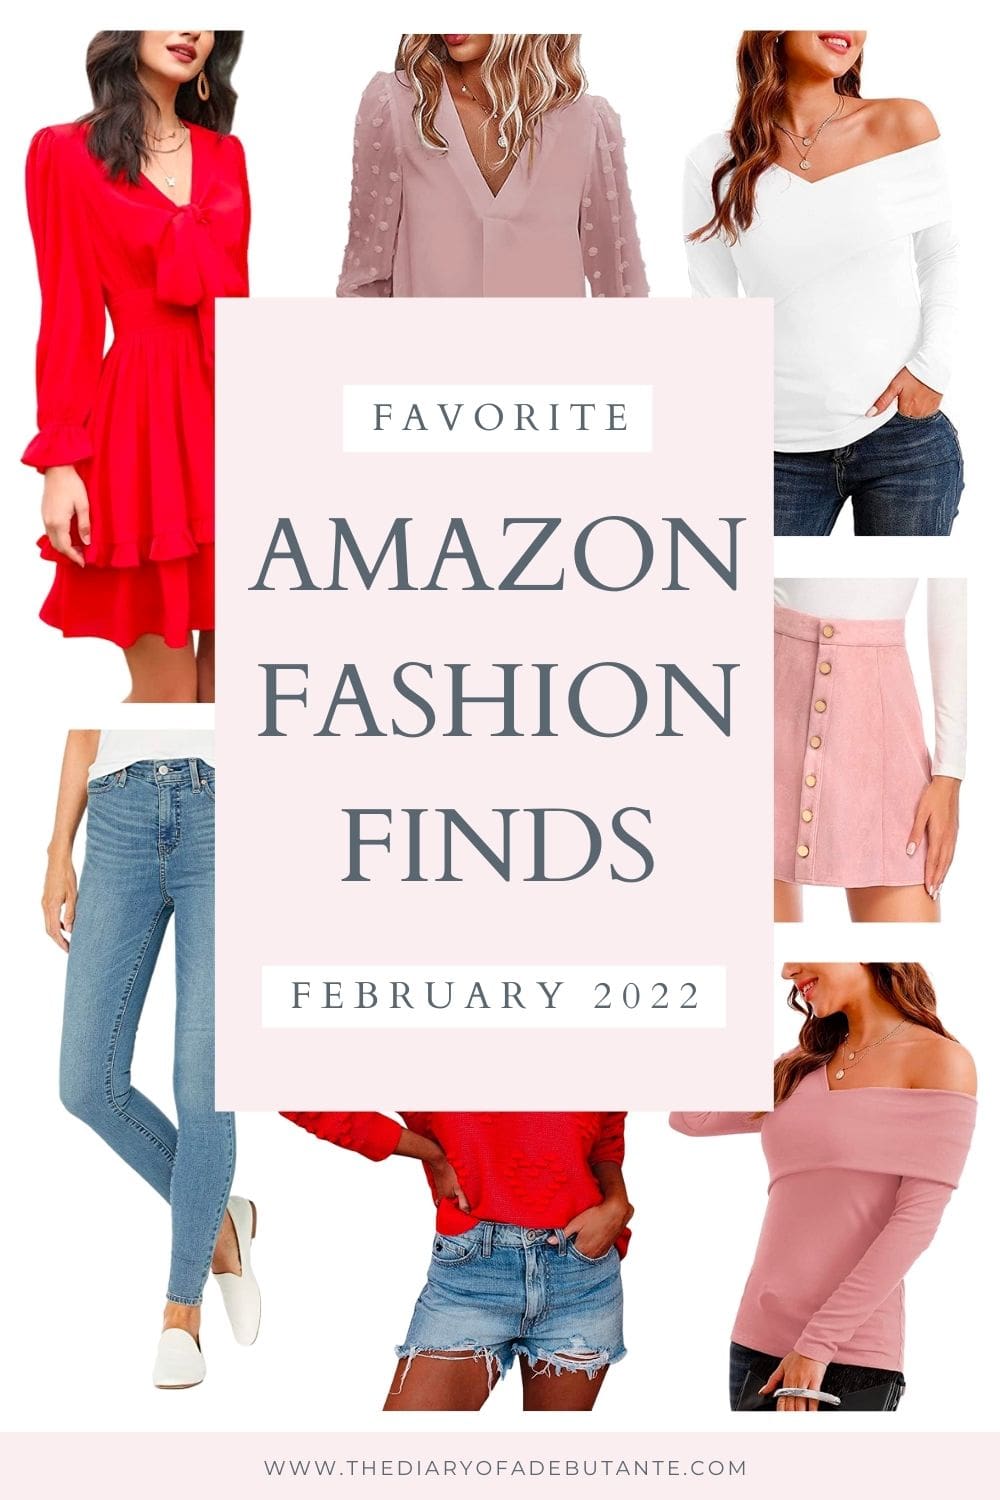 Valentine's Day Amazon Fashion favorites under $50 rounded up by affordable fashion blogger Stephanie Ziajka on Diary of a Debutante